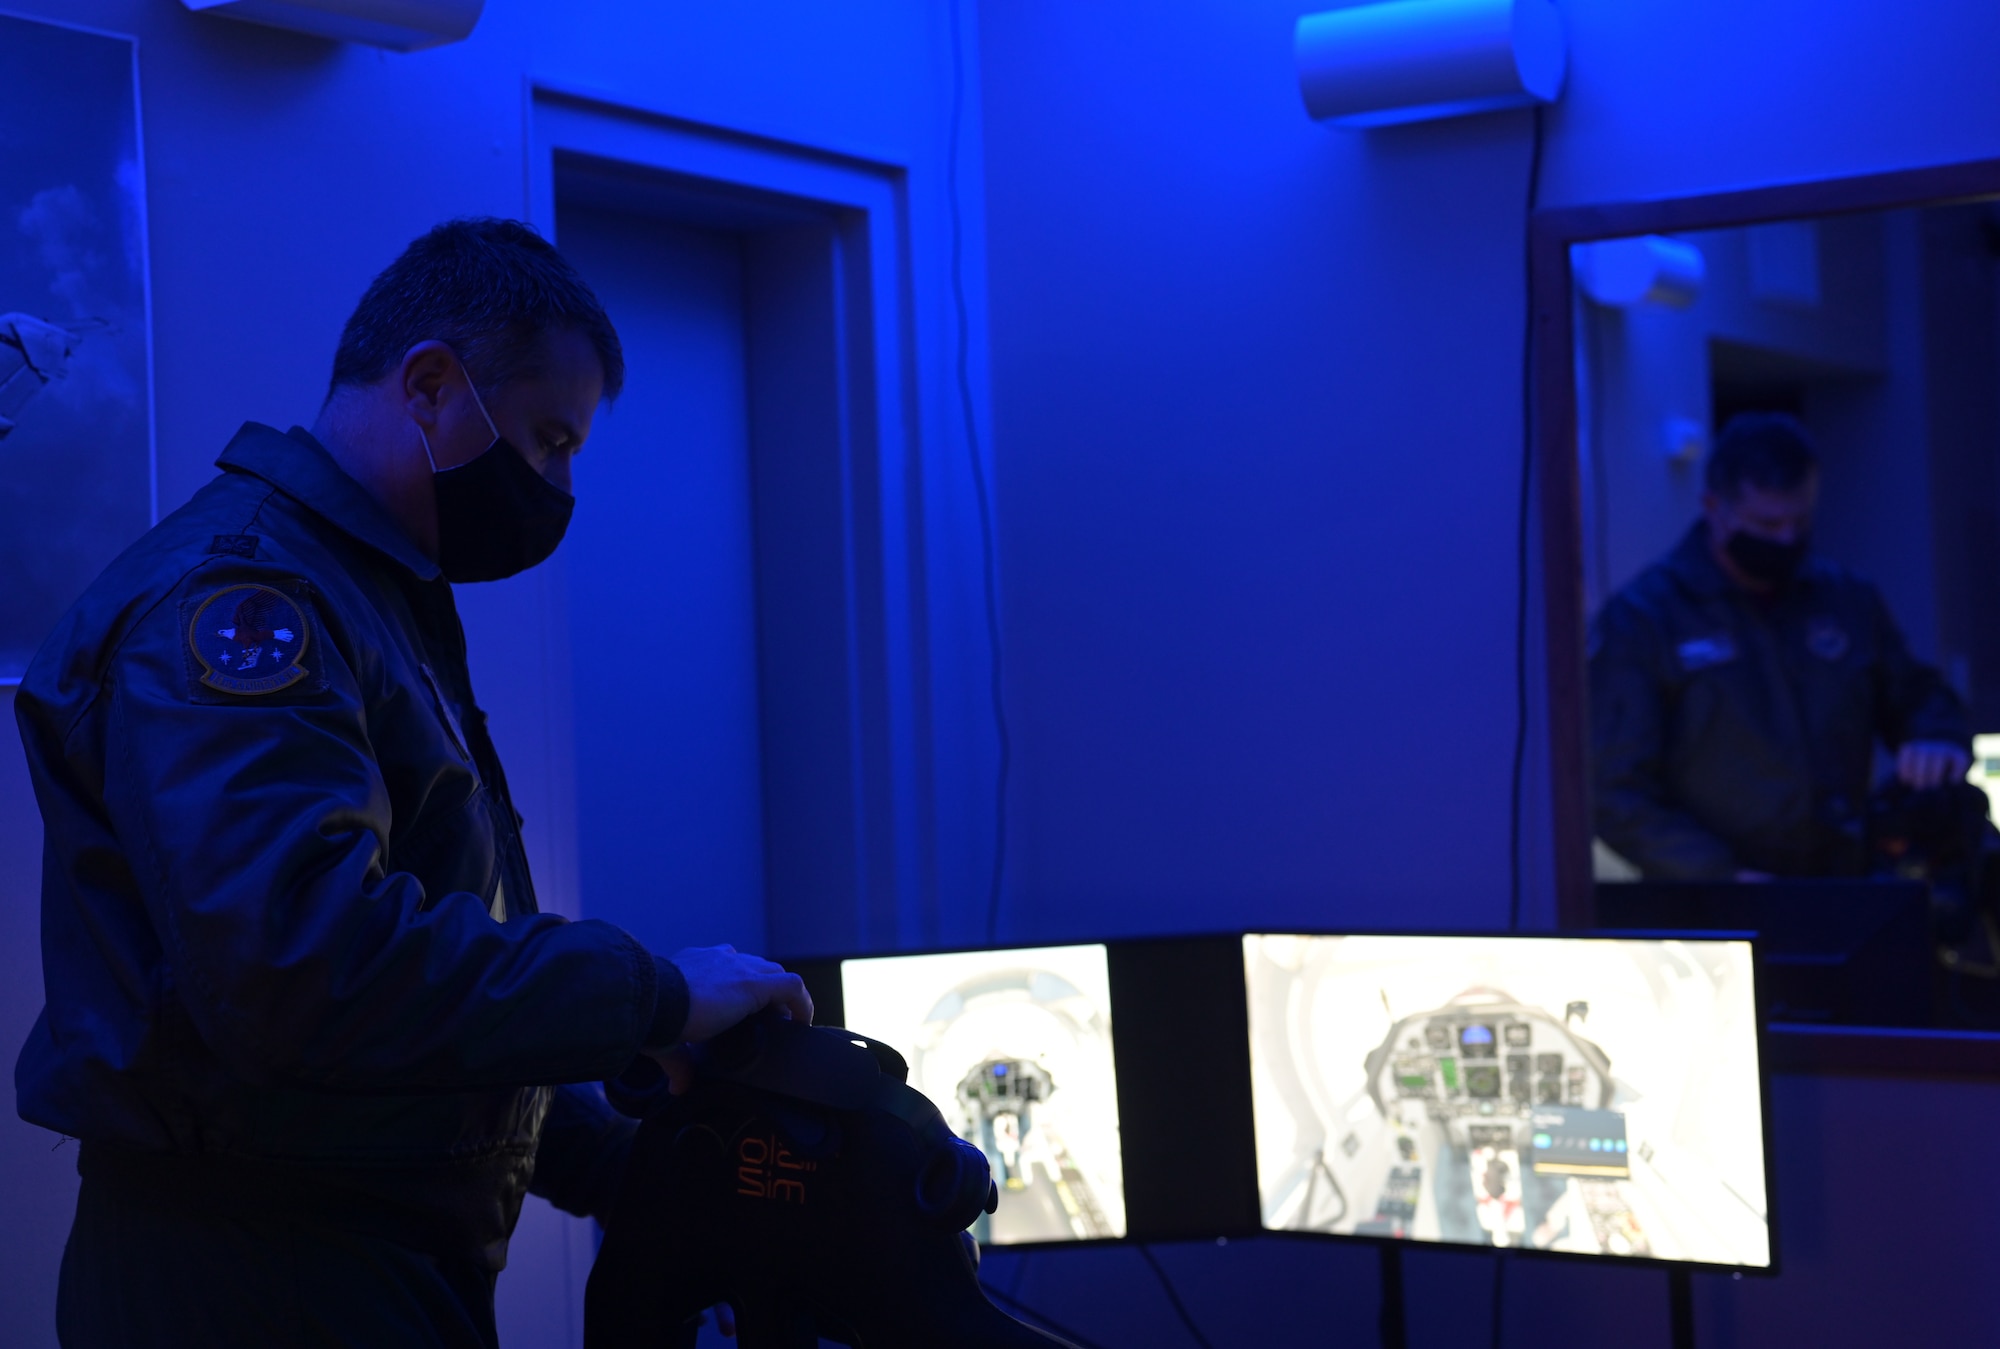 U.S. Air Force L.t Col. Joseph McCane, 14th Student Squadron commander, explores a virtual reality headset during the grand opening of a training room provide for student pilots in the unaccompanied officer dorms, Feb. 12, 2021, on Columbus Air Force Base, Miss. Access to virtual reality training will help student pilots awaiting training to better prepare for Specialized Undergraduate Pilot Training. (U.S. Air Force photo by Airman 1st Class Jessica Haynie)